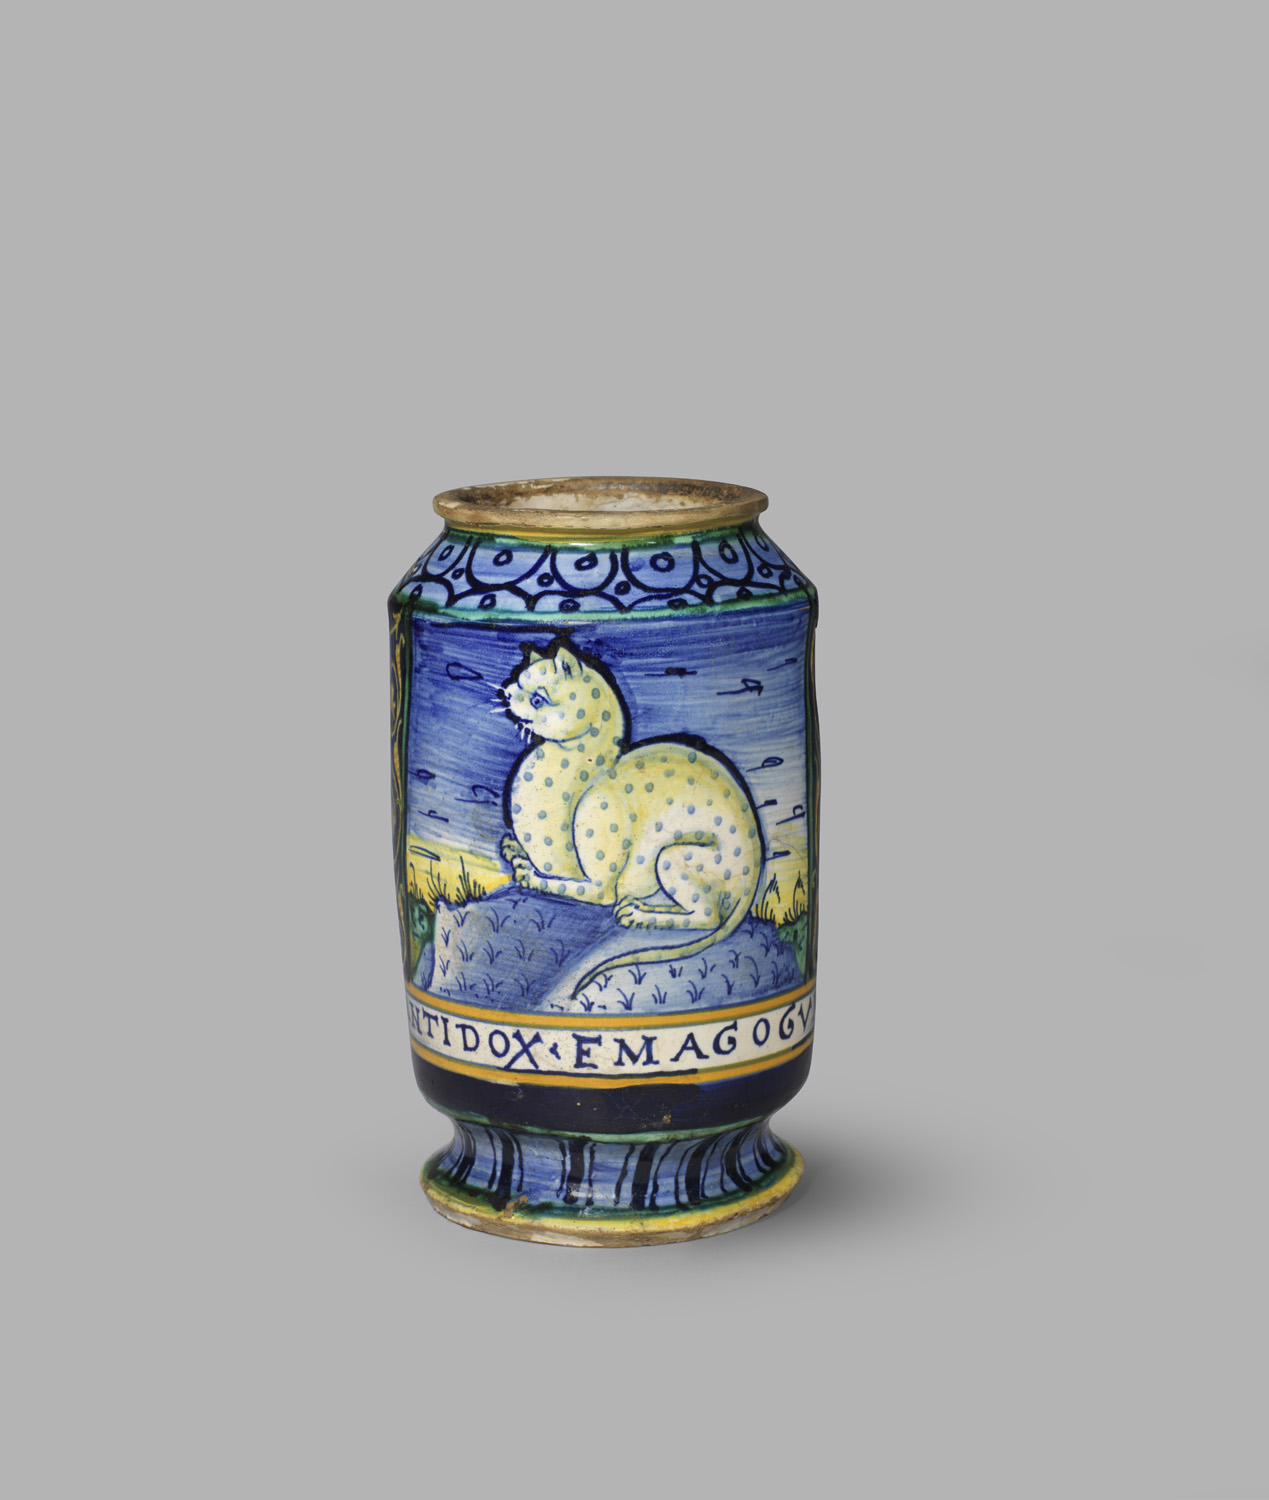 Blue and yellow pharmacy jar painted with a feline and an inscription for a menstruation remedy